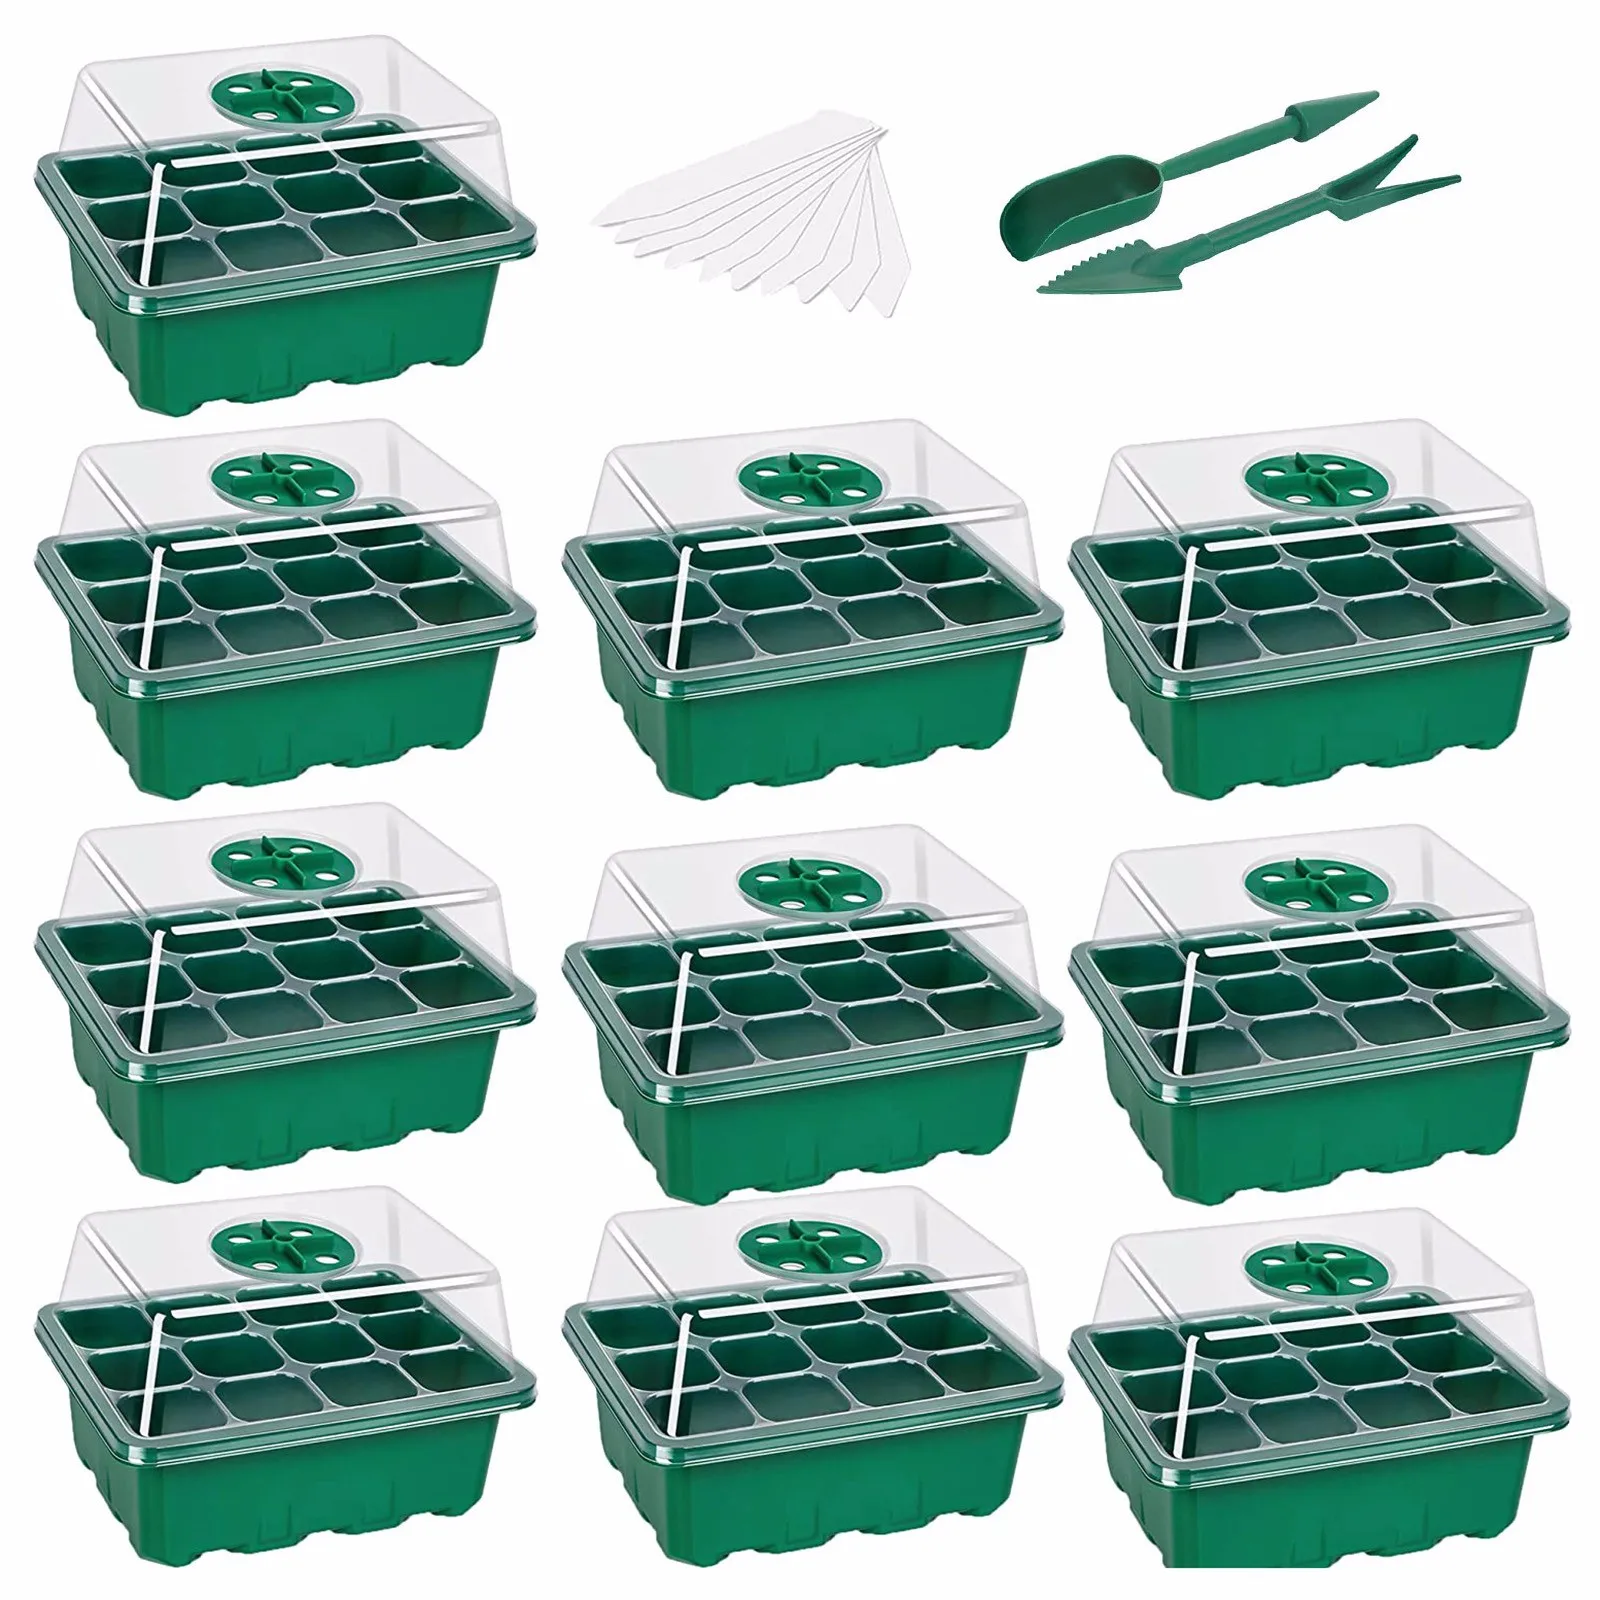 24Cells per Tray Seed Starter Tray Seed Starter kit 6 Pack Seed Starter Humidity Adjustable Seed Starting Mix with Dome Seed Starting Trays for Base Greenhouse Grow Seedling Starter Tray 